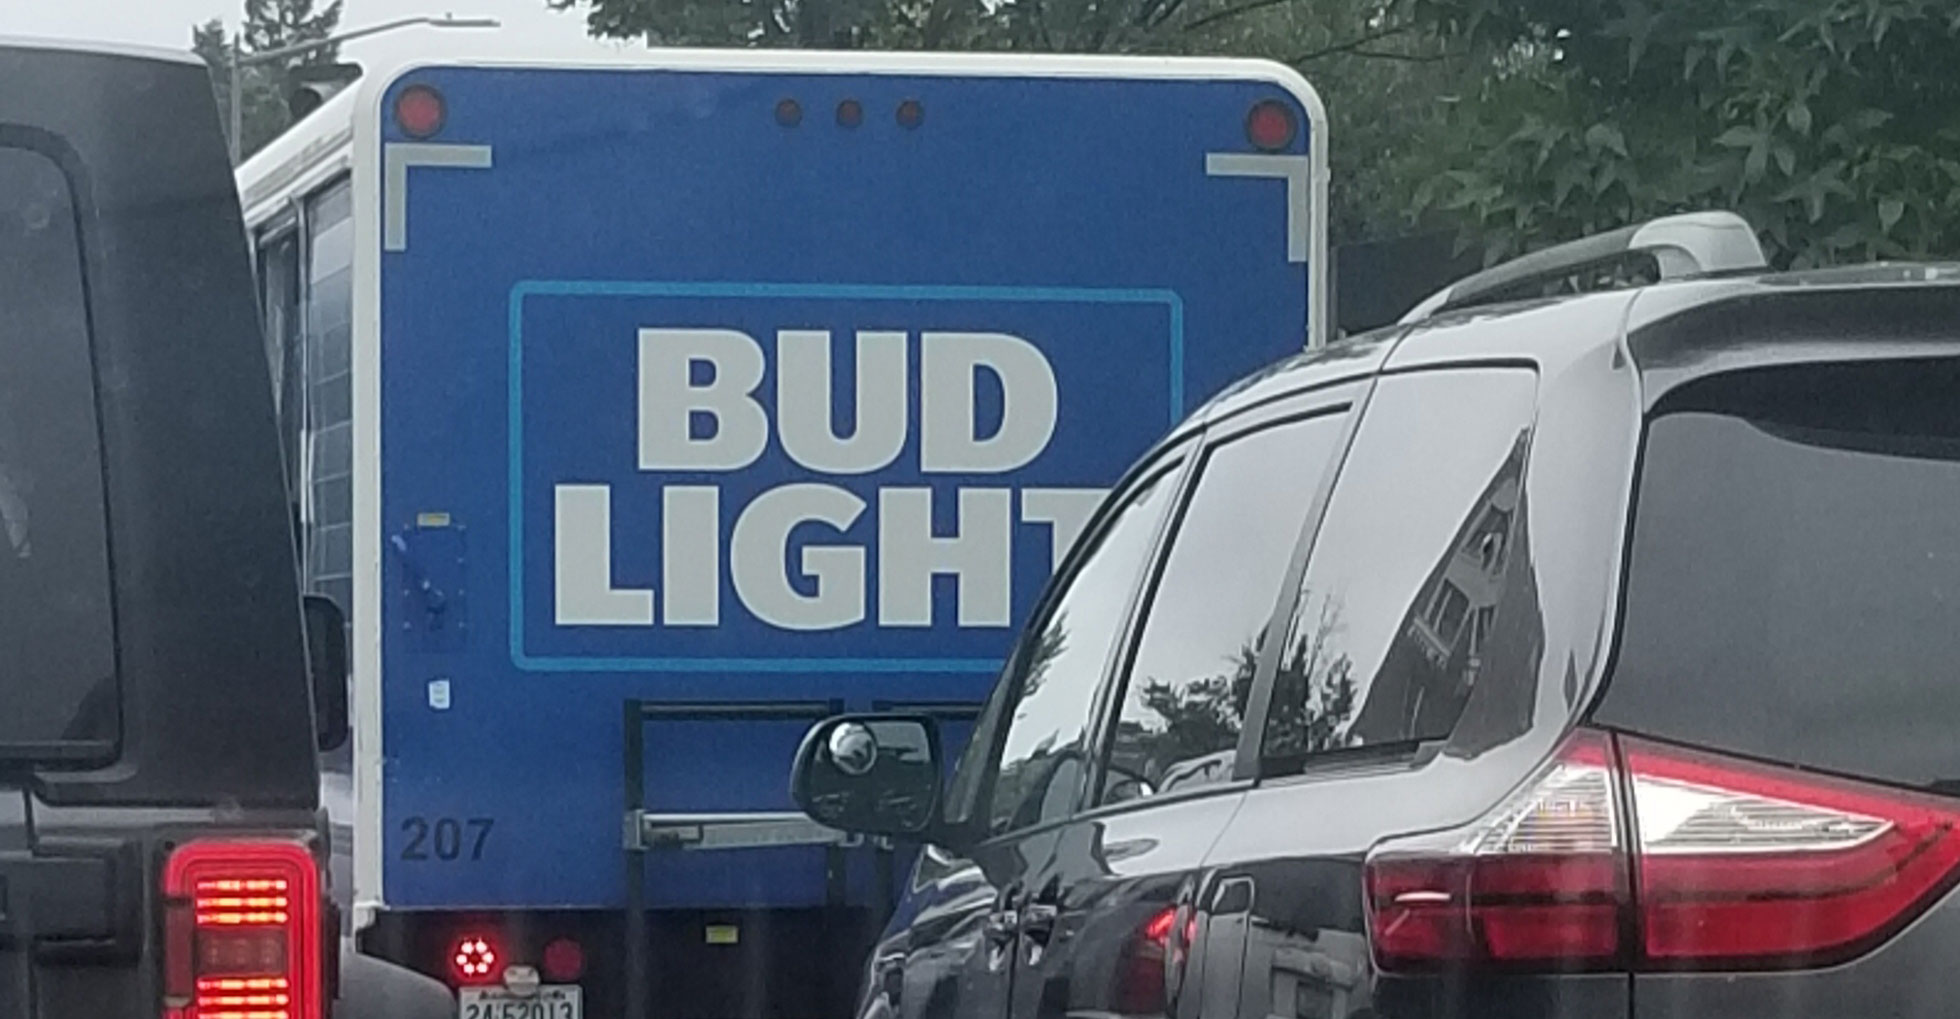 2 Non-Woke Companies Offer Job Placement Help for Bud Light's Laid-Off Employees